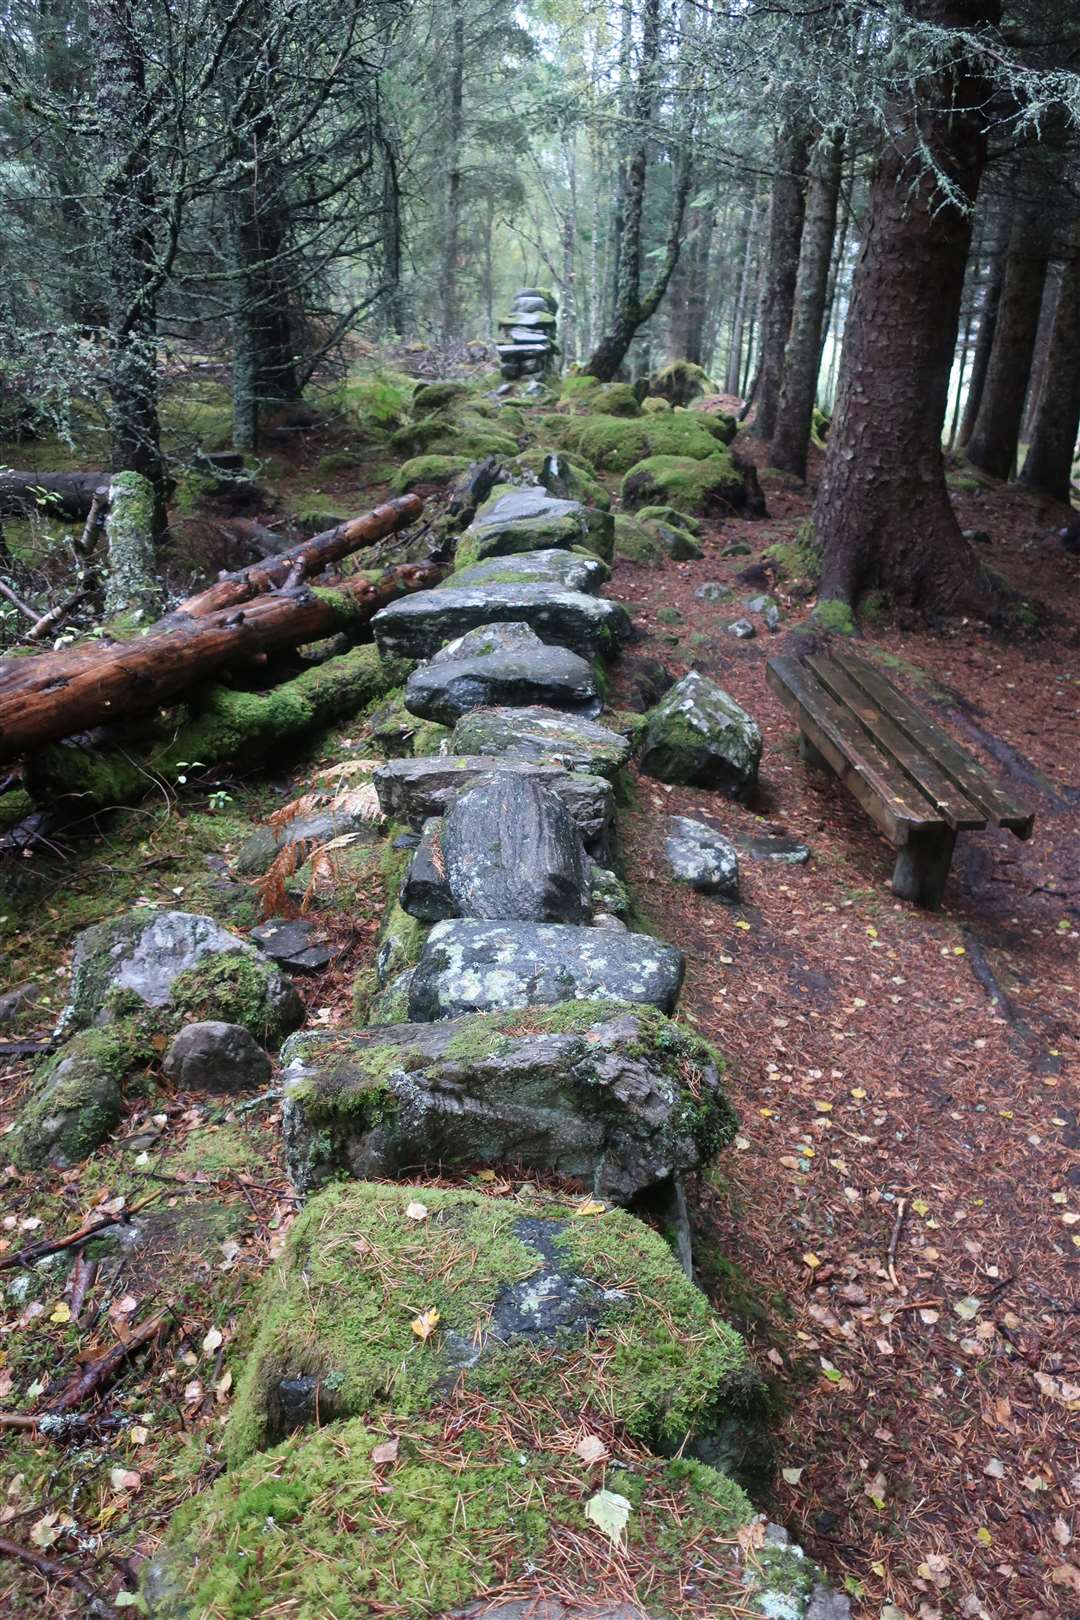 An old stone dyke within the forestry shows its age with mosses and lichens.